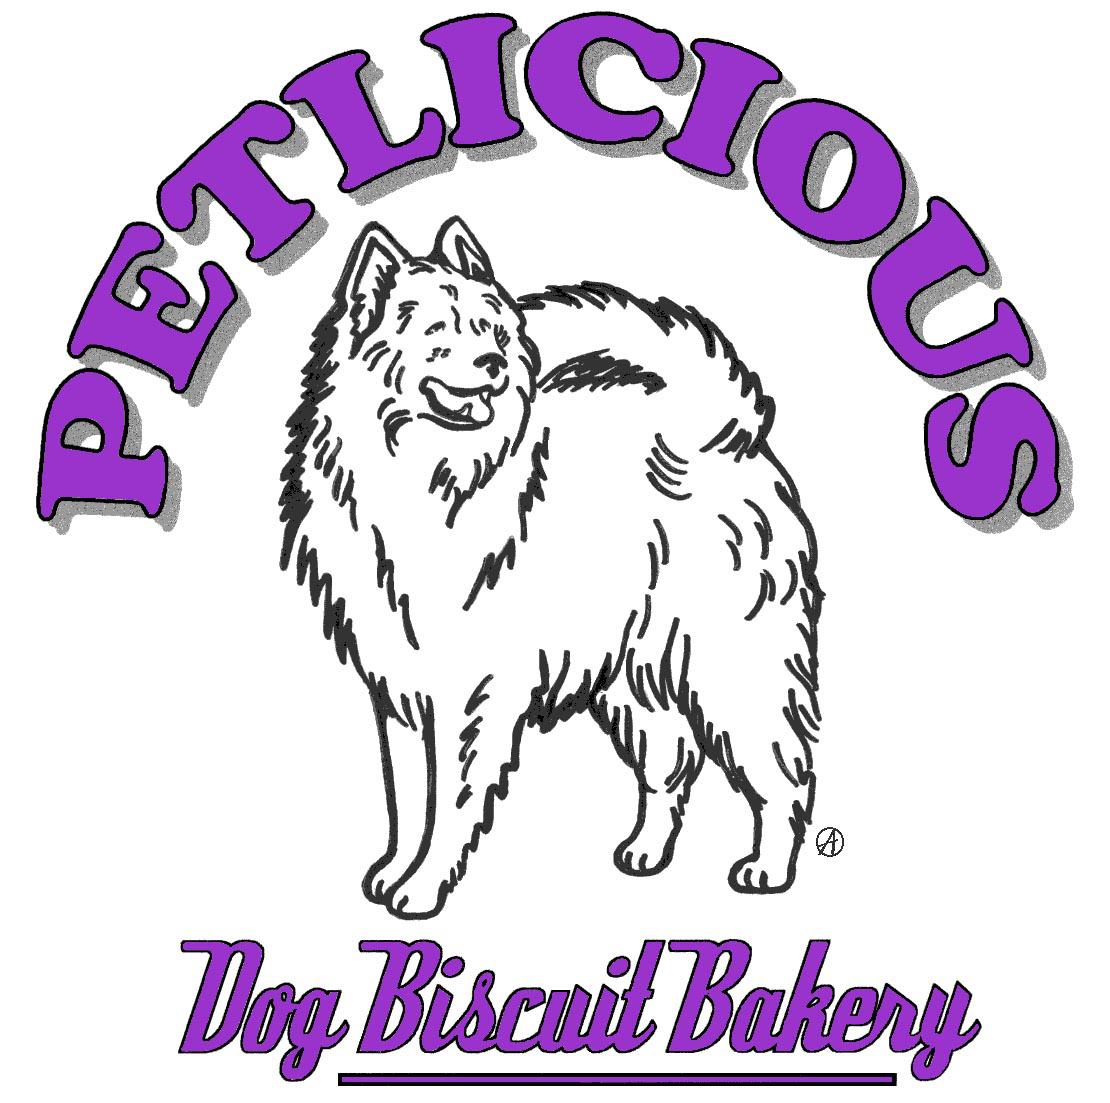 Company logo of Petlicious Dog Biscuit Bakery